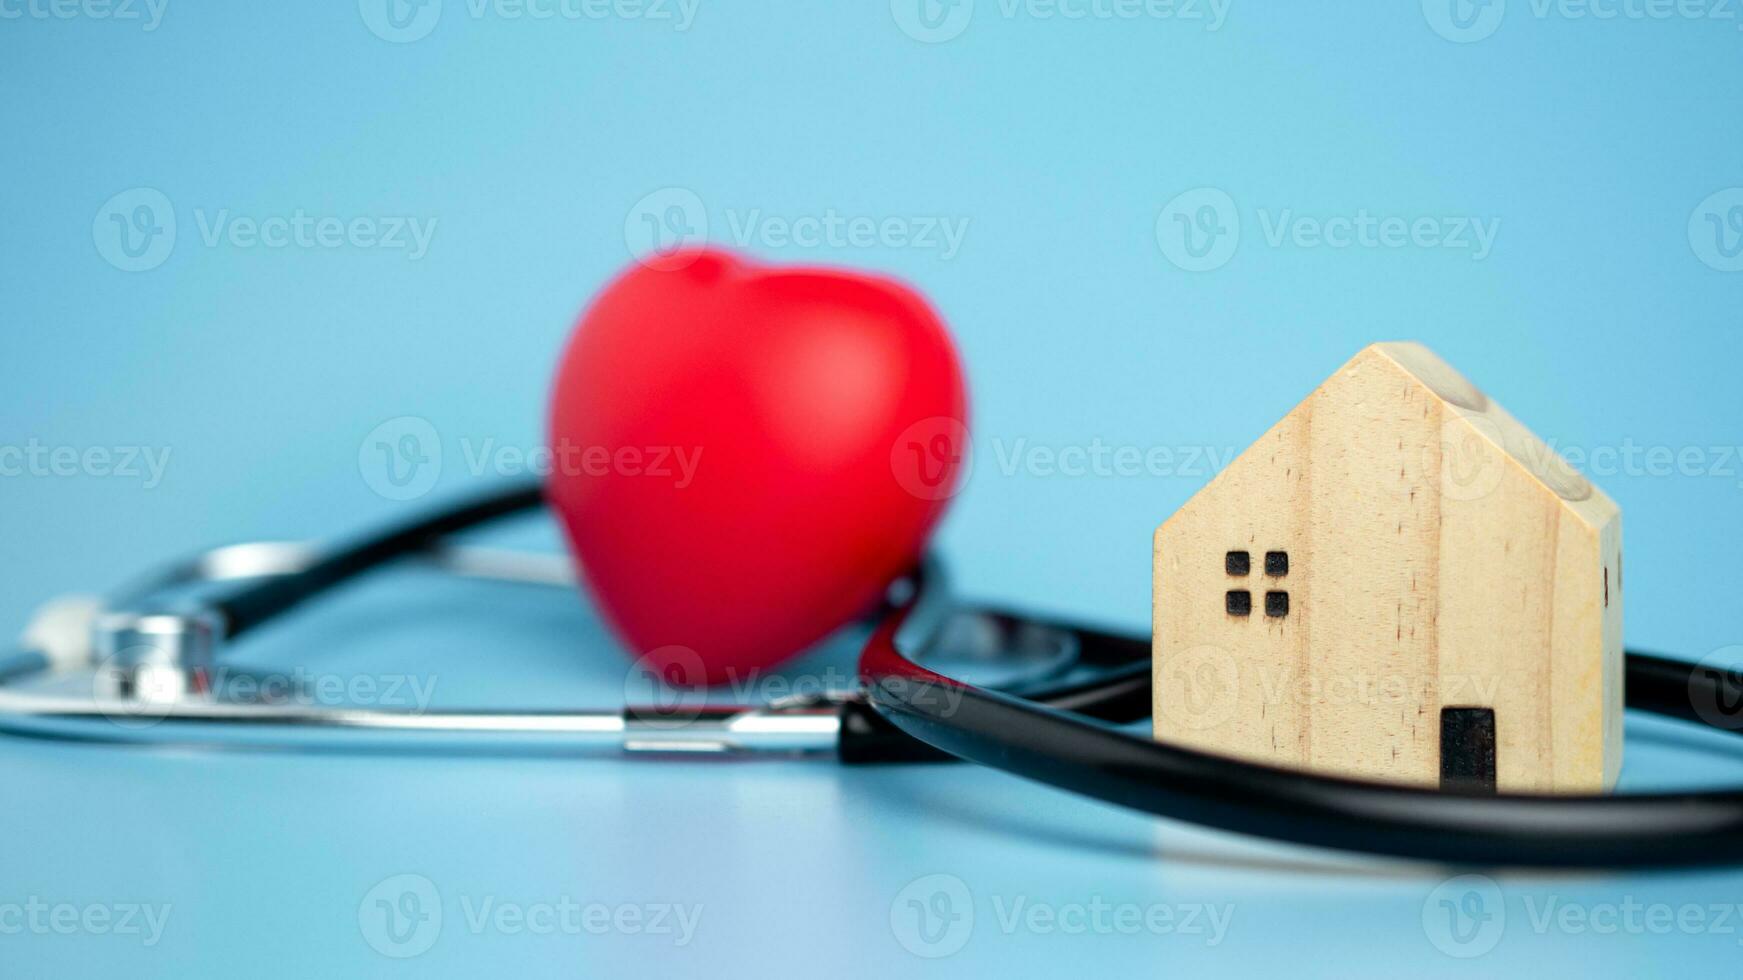 Concept of health insurance and medical welfare, small wooden house and red heart with stethoscope on blue background, health insurance and access to healthcare. photo